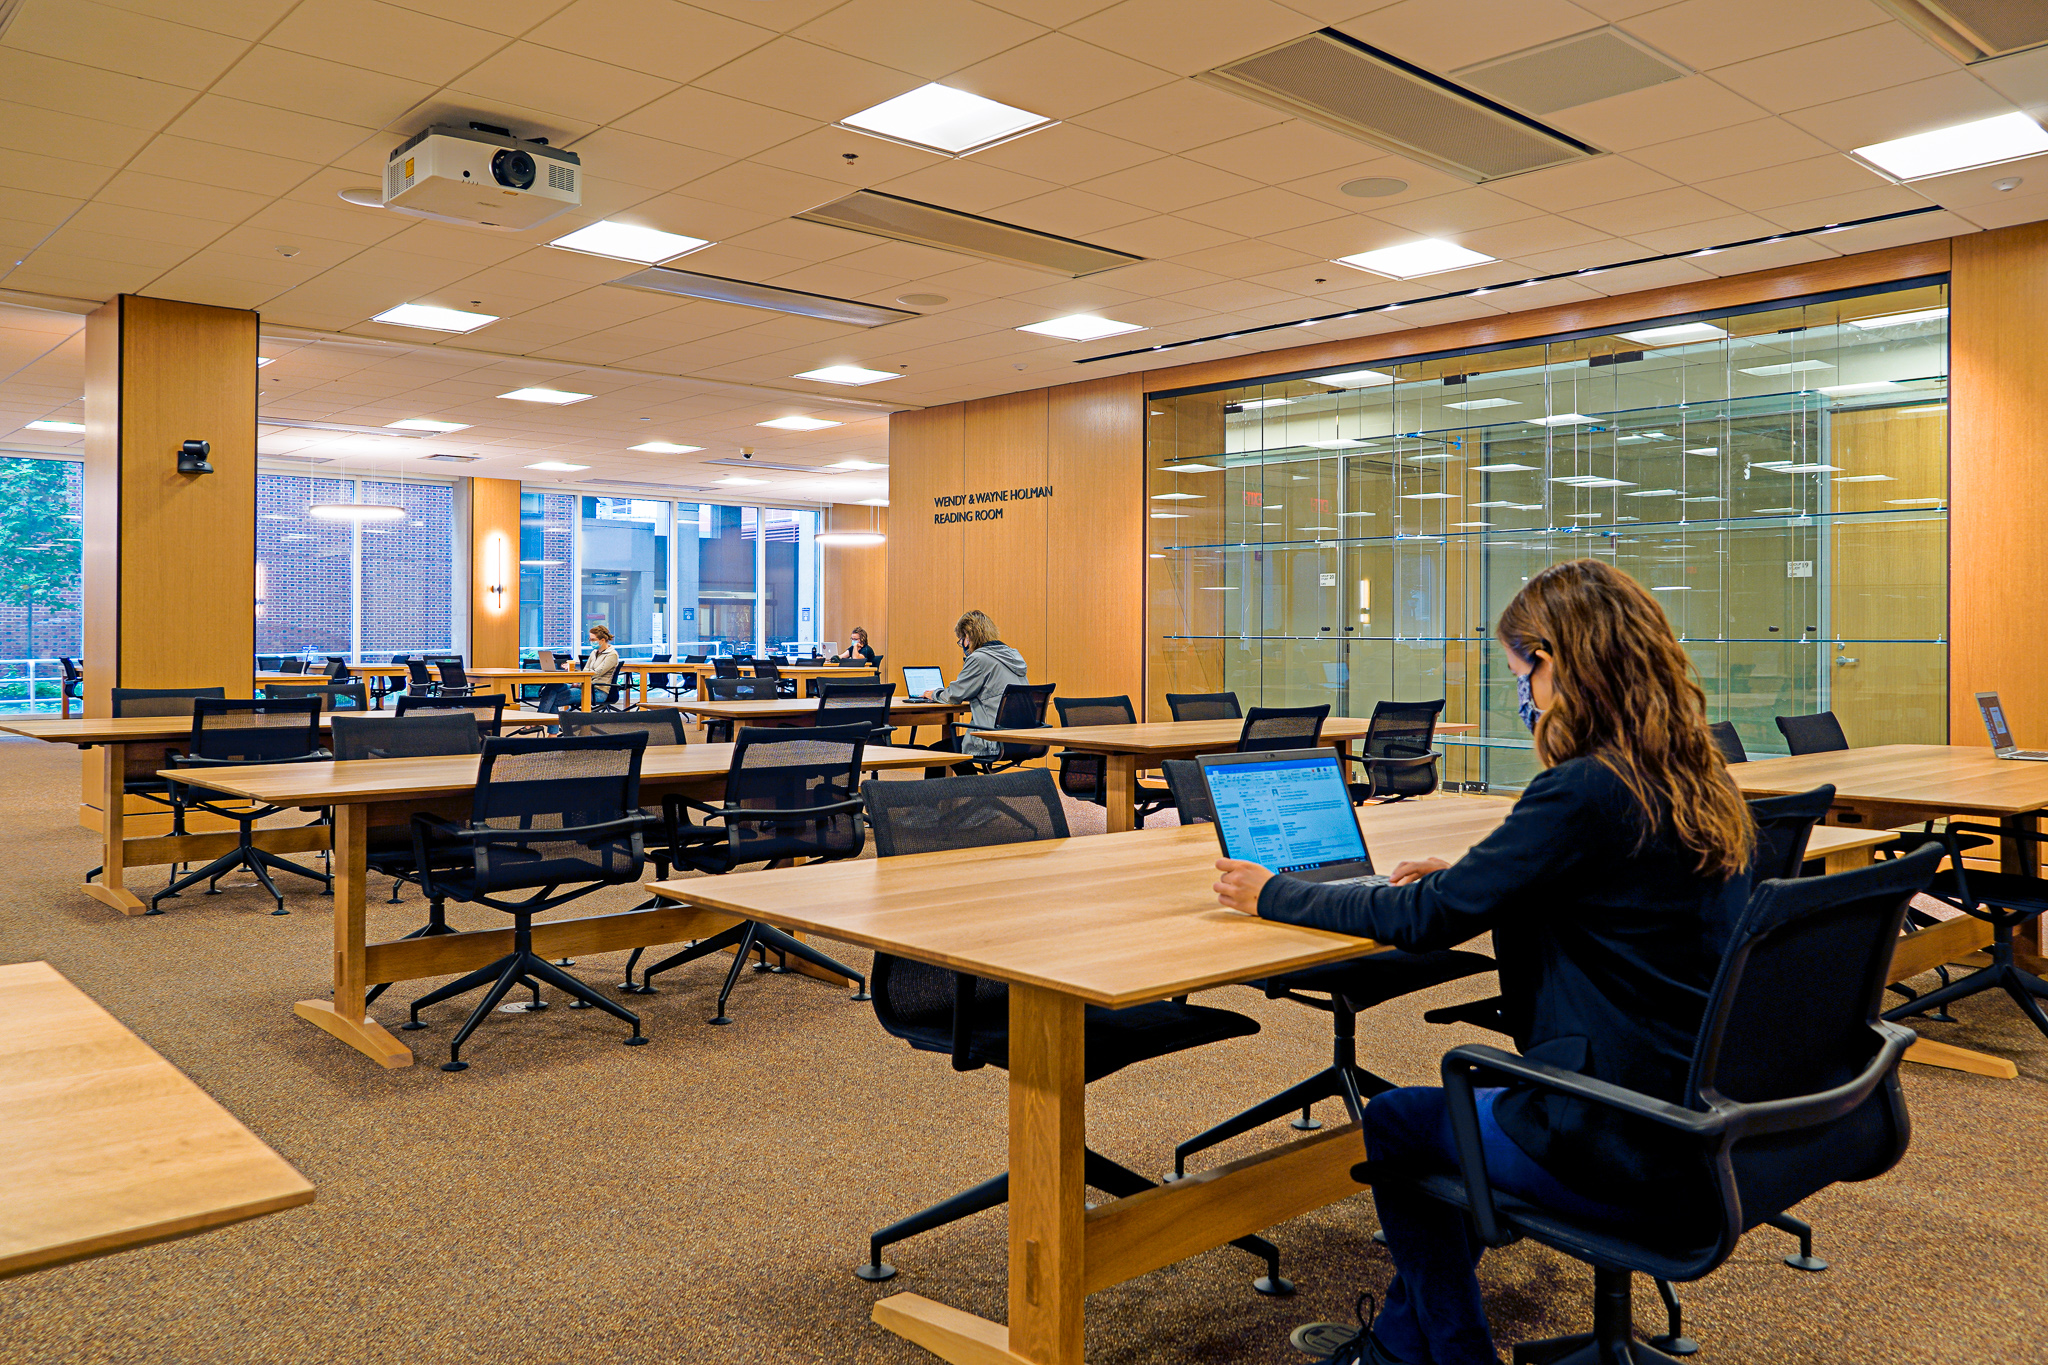 person sitting at laptop in new library space